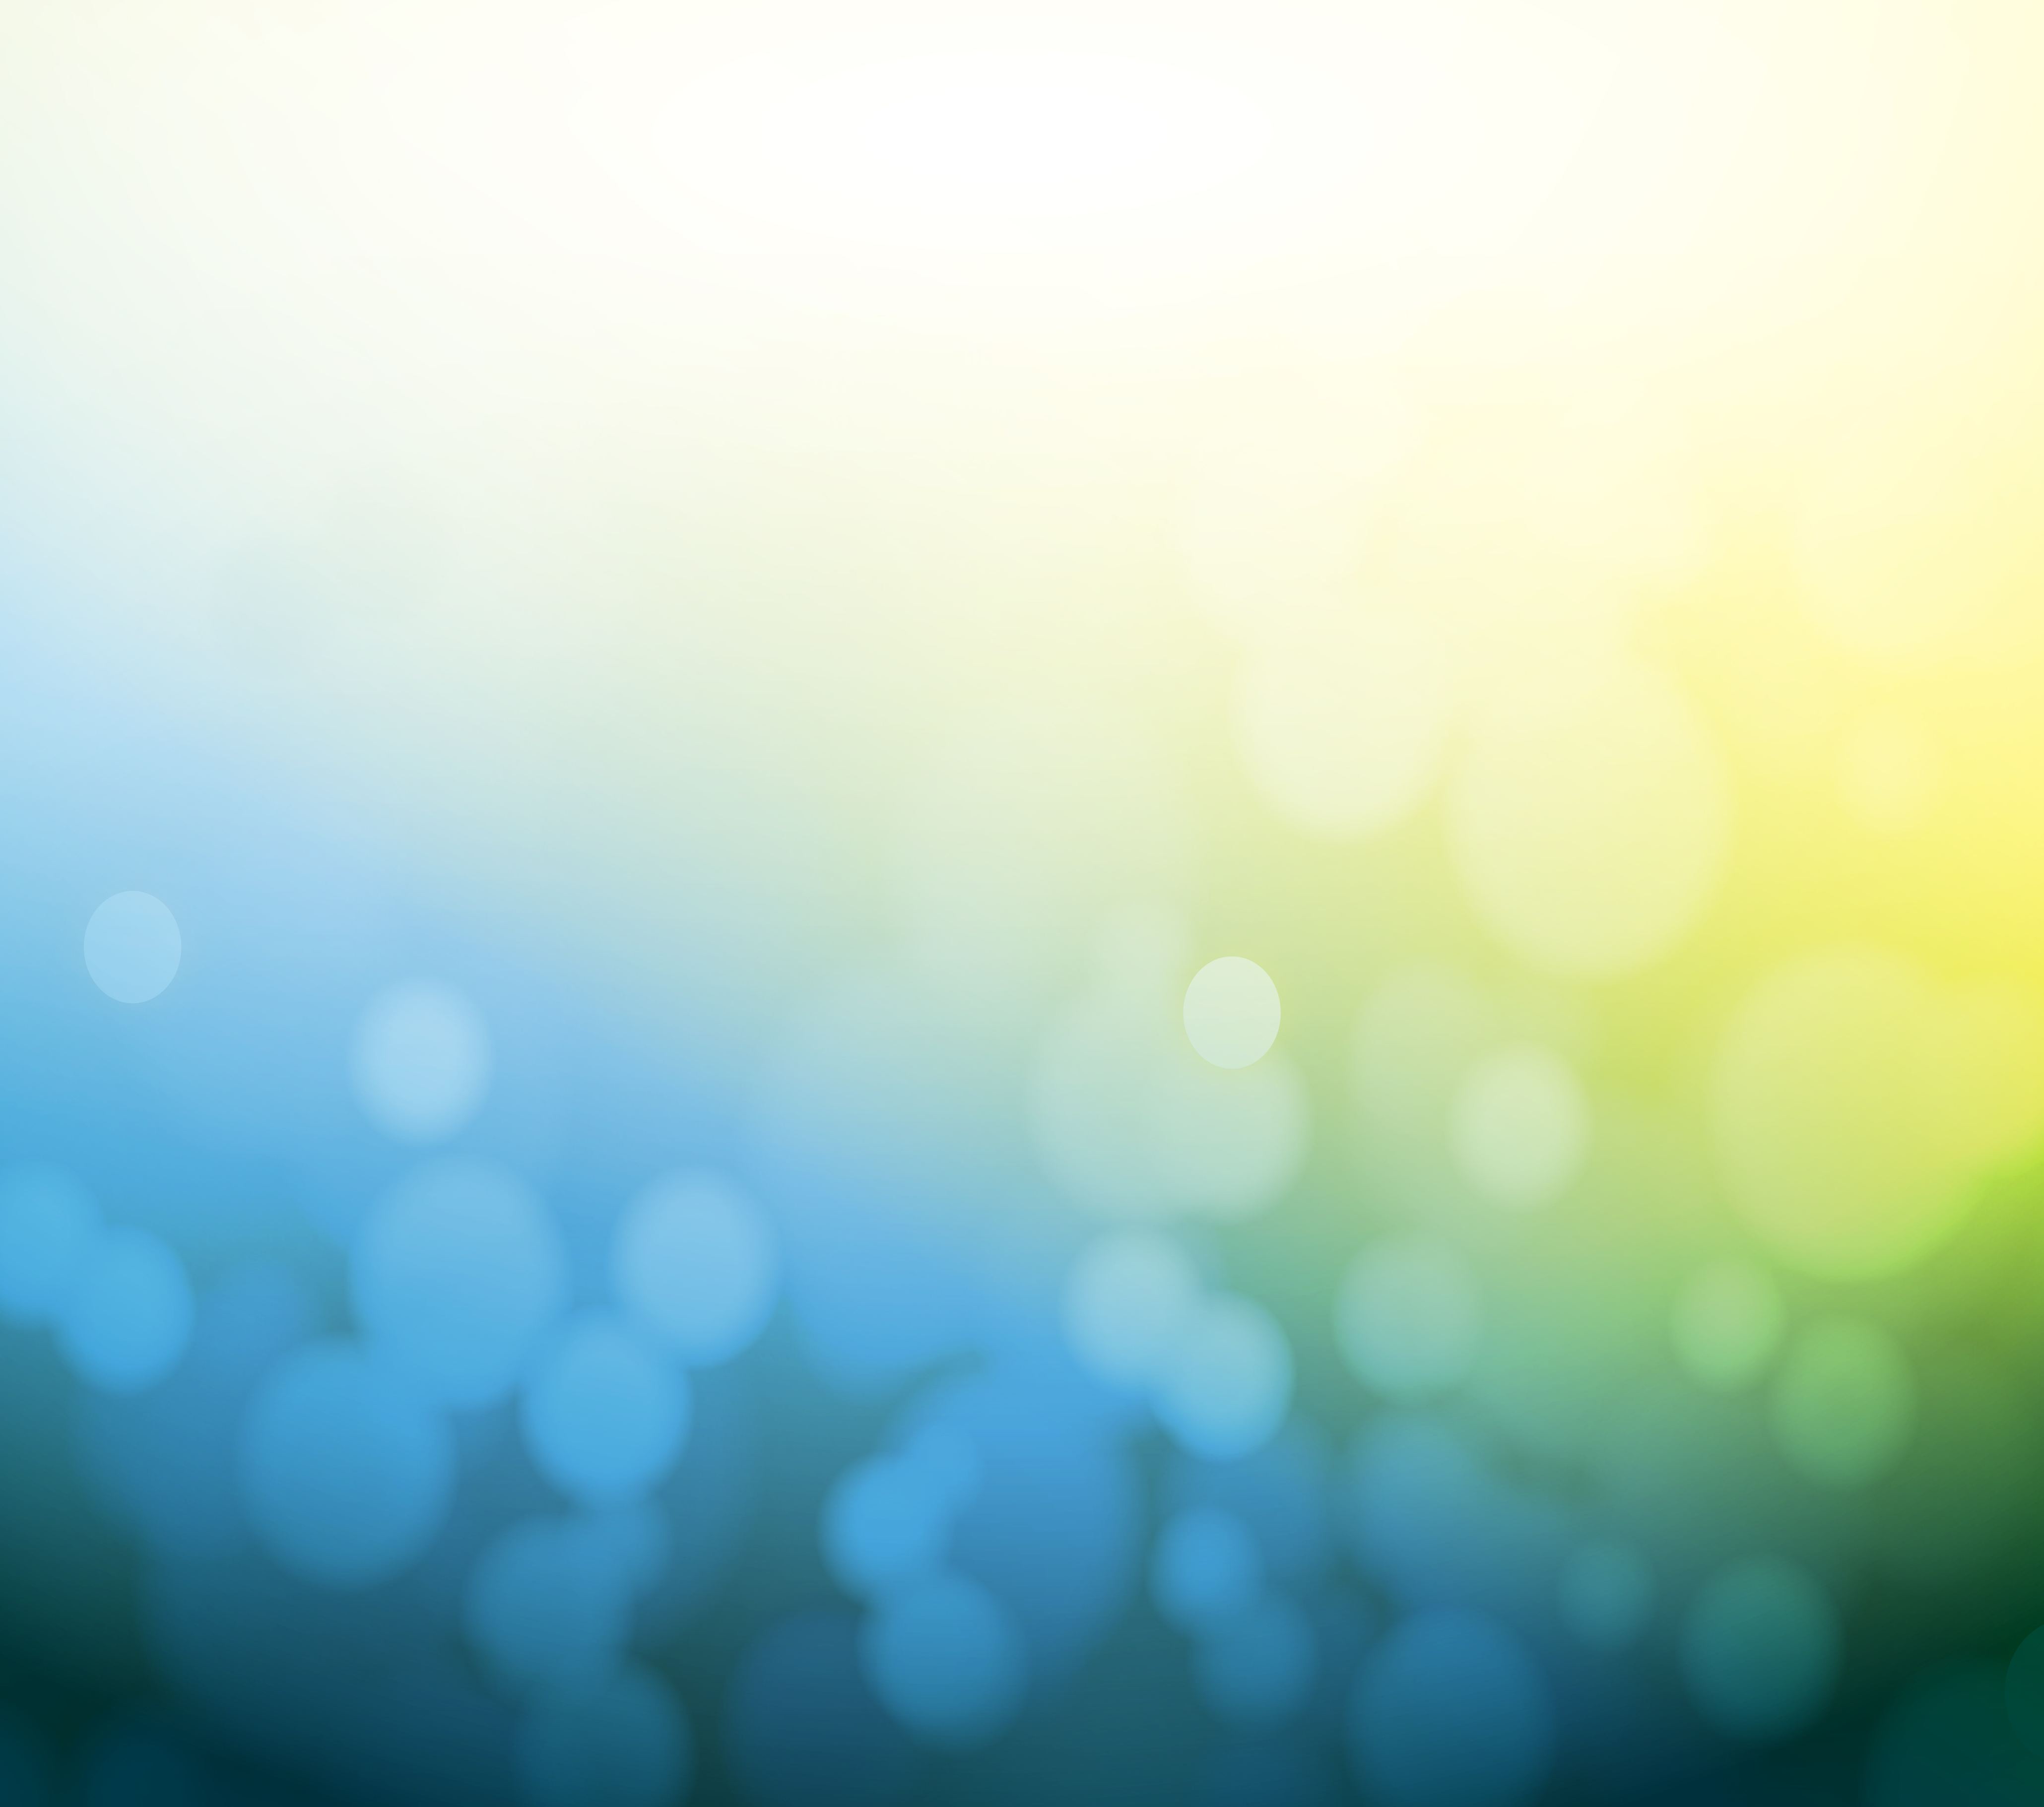 Blue And Yellow Bokeh Abstract Light Background Illustration Design